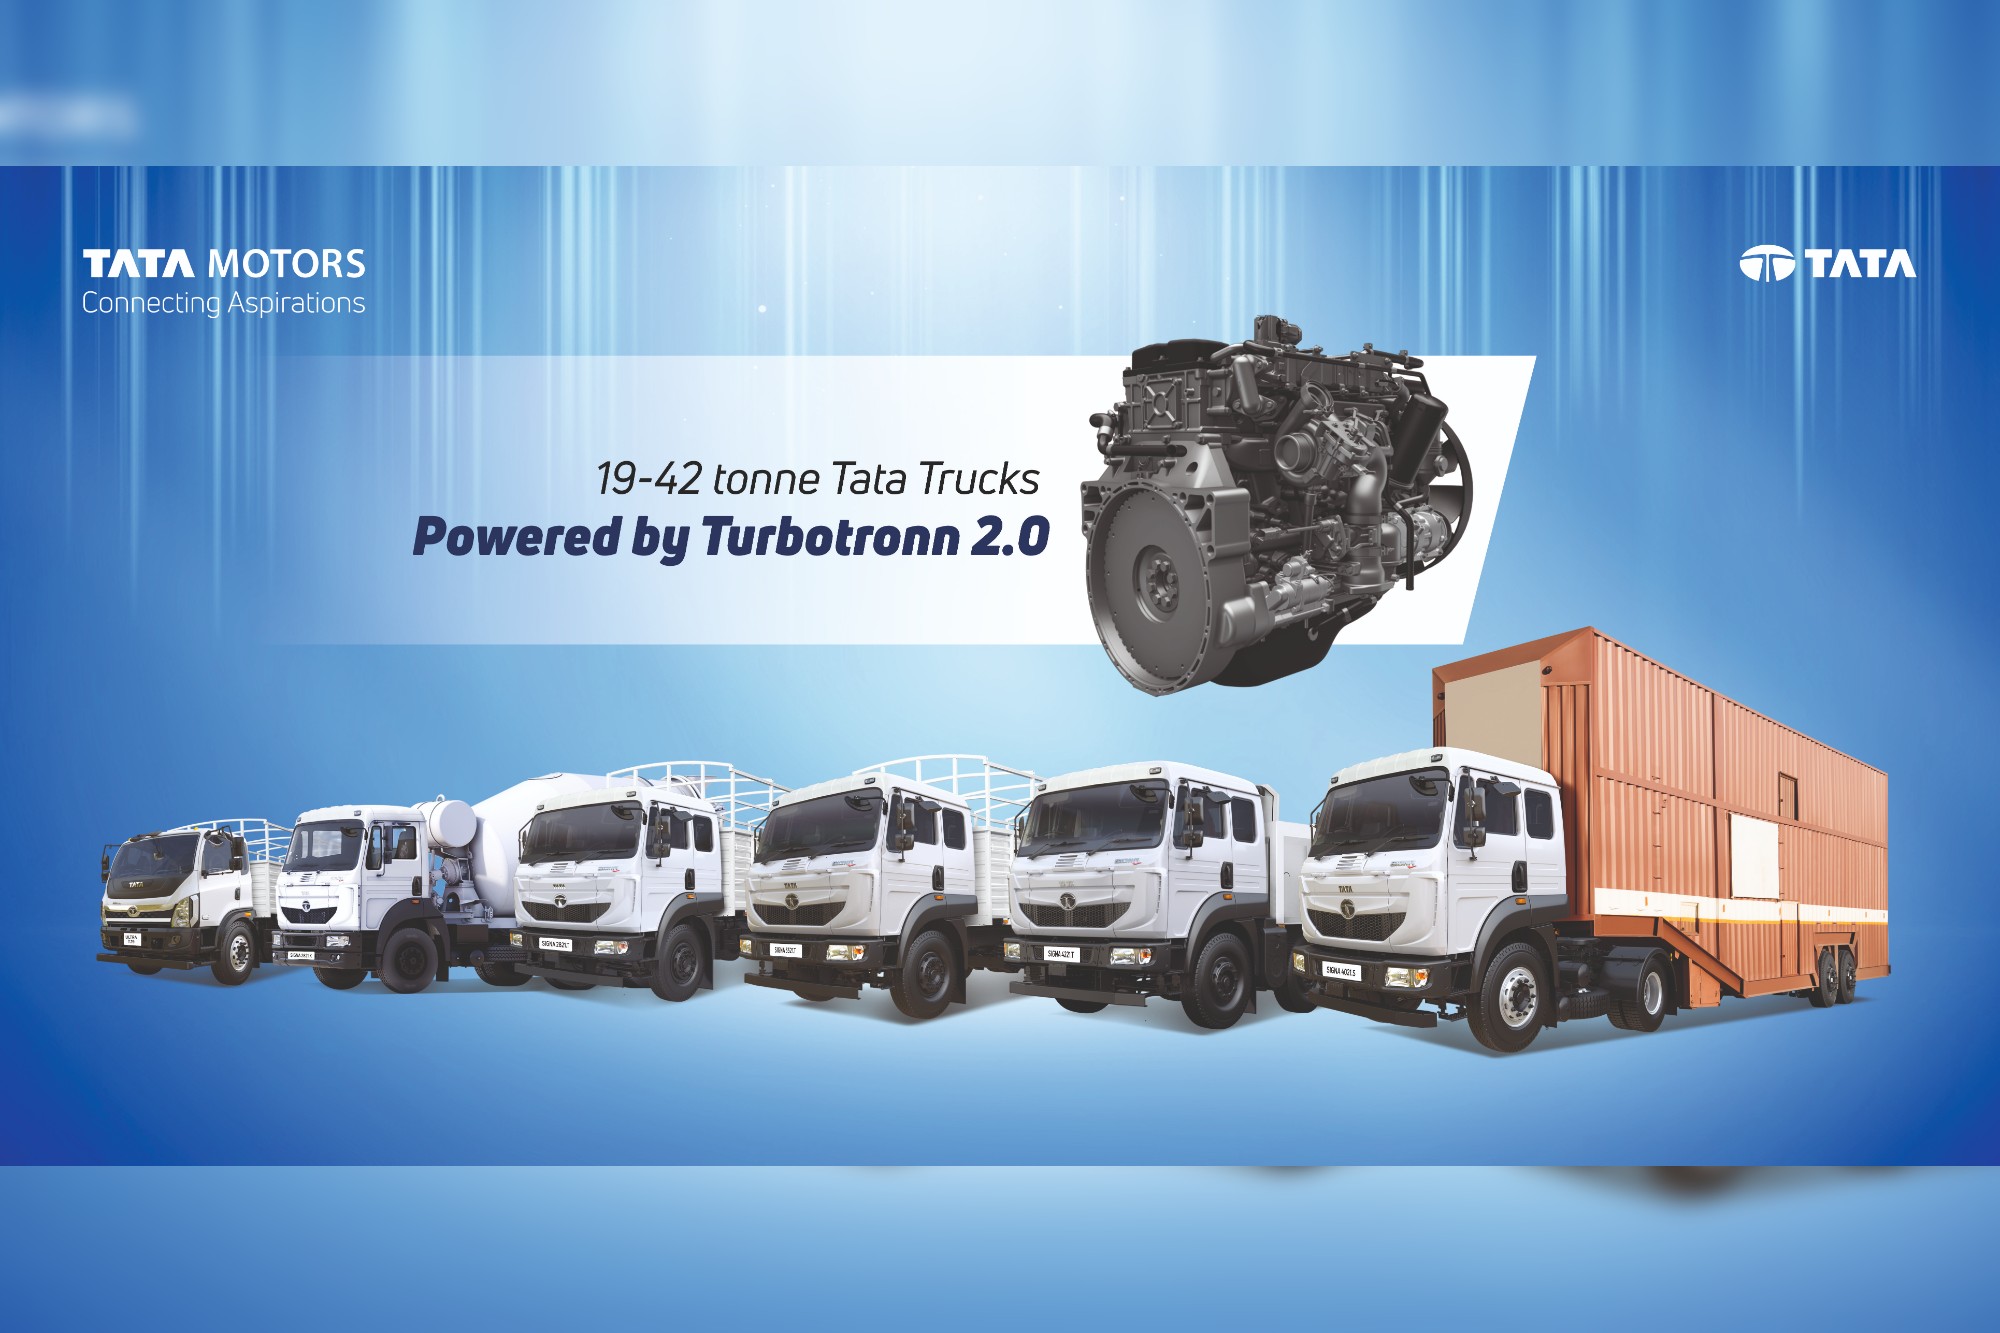 Tata Motors launches Turbotronn 2.0 for enhanced trucking efficiency Tata Motors, India's foremost commercial vehicle manufacturer, has unveiled its cutting-edge Turbotronn 2.0 engine, setting a new standard of excellence in the trucking industry. This technologically advanced engine, developed in-house, is highly fuel-efficient and reliable, catering to Tata trucks in the 19-42 tonne range across various applications. Tailored to meet the specific needs of rapidly growing sectors such as e-commerce, logistics, parcel, and courier services, the Turbotronn 2.0 engine not only enhances the driving experience but is also engineered to deliver robust performance while significantly lowering the Total Cost of Ownership (TCO). Rigorous testing, covering over 30 lakh km and 70,000 cumulative hours across diverse duty cycles and challenging terrains, ensures its reliability. The Turbotronn 2.0 engine is a 5-liter turbocharged diesel engine, offering multiple states of tune ranging from 180-204 PS. Its design ensures a flatter torque curve in the 700-850 Nm range, contributing to improved drivability. With longer oil drain and service intervals of 1 lakh km, this engine provides distinct advantages, including more vehicle uptime that translates to higher revenues for users. Compliant with the BS6 Phase 2 emission norms, the Turbotronn 2.0 is platform-agnostic, seamlessly integrated with the Signa, Ultra, LPT, and cowl platforms. Tata Motors stands behind the performance of this engine, offering a warranty of 6 years/6 lakh km, instilling confidence in customers. Introducing the Turbotronn 2.0, Rajendra Petkar, President and Chief Technology Officer, Tata Motors, says "The Turbotronn 2.0 is one of our most advanced internal combustion engines. Engineered with latest technologies, it enables trucks to cover longer distances in shorter time. Its robust performance and high fuel efficiency has set new industry benchmarks for trucking in India.” Sharing his thoughts, Rajesh Kaul, Vice President & Business Head – Trucks, Tata Motors, says, “At Tata Motors, we closely partner with customers to make their businesses prosper. The Turbotronn 2.0 has been developed with extensive inputs from transporters and provides them with an edge in the highly competitive industry. Its superior value proposition, makes trucking more seamless, efficient and reliable resulting in higher revenues and lower costs.” As a comprehensive mobility solutions provider, Tata Motors commercial vehicles offer advanced features, efficient powertrains, and value-added services. Fleet owners benefit from improved fuel efficiency, reduced operating costs, high vehicle uptime, and real-time tracking and analytics through Tata Motors Fleet Edge. The Sampoorna Seva 2.0 initiative further provides unparalleled vehicle lifecycle management services, including fleet management solutions, annual maintenance contracts, and roadside assistance, among others. With a vast service network of 2500+ touchpoints staffed by trained specialists and backed by Tata Genuine Parts, Tata Motors ensures unmatched quality and service commitment. To validate the reliability of the Turbotronn 2.0 engine, Tata Motors initiated a 30-day endurance run with the Tata Ultra T.19, powered by this advanced engine. The goal was to complete a non-stop run on the Golden Quadrilateral, a crucial national highway network connecting India's major metros, establishing the highest standards of durability and efficiency. Remarkably, the Tata Ultra T.19 not only successfully completed nine rounds of the Golden Quadrilateral but also secured nine records in both the India Book of Records and the Asia Book of Records. These exceptional achievements underscore the efficiency and reliability of the Turbotronn 2.0 engine, marking a significant milestone in the realm of commercial vehicles.